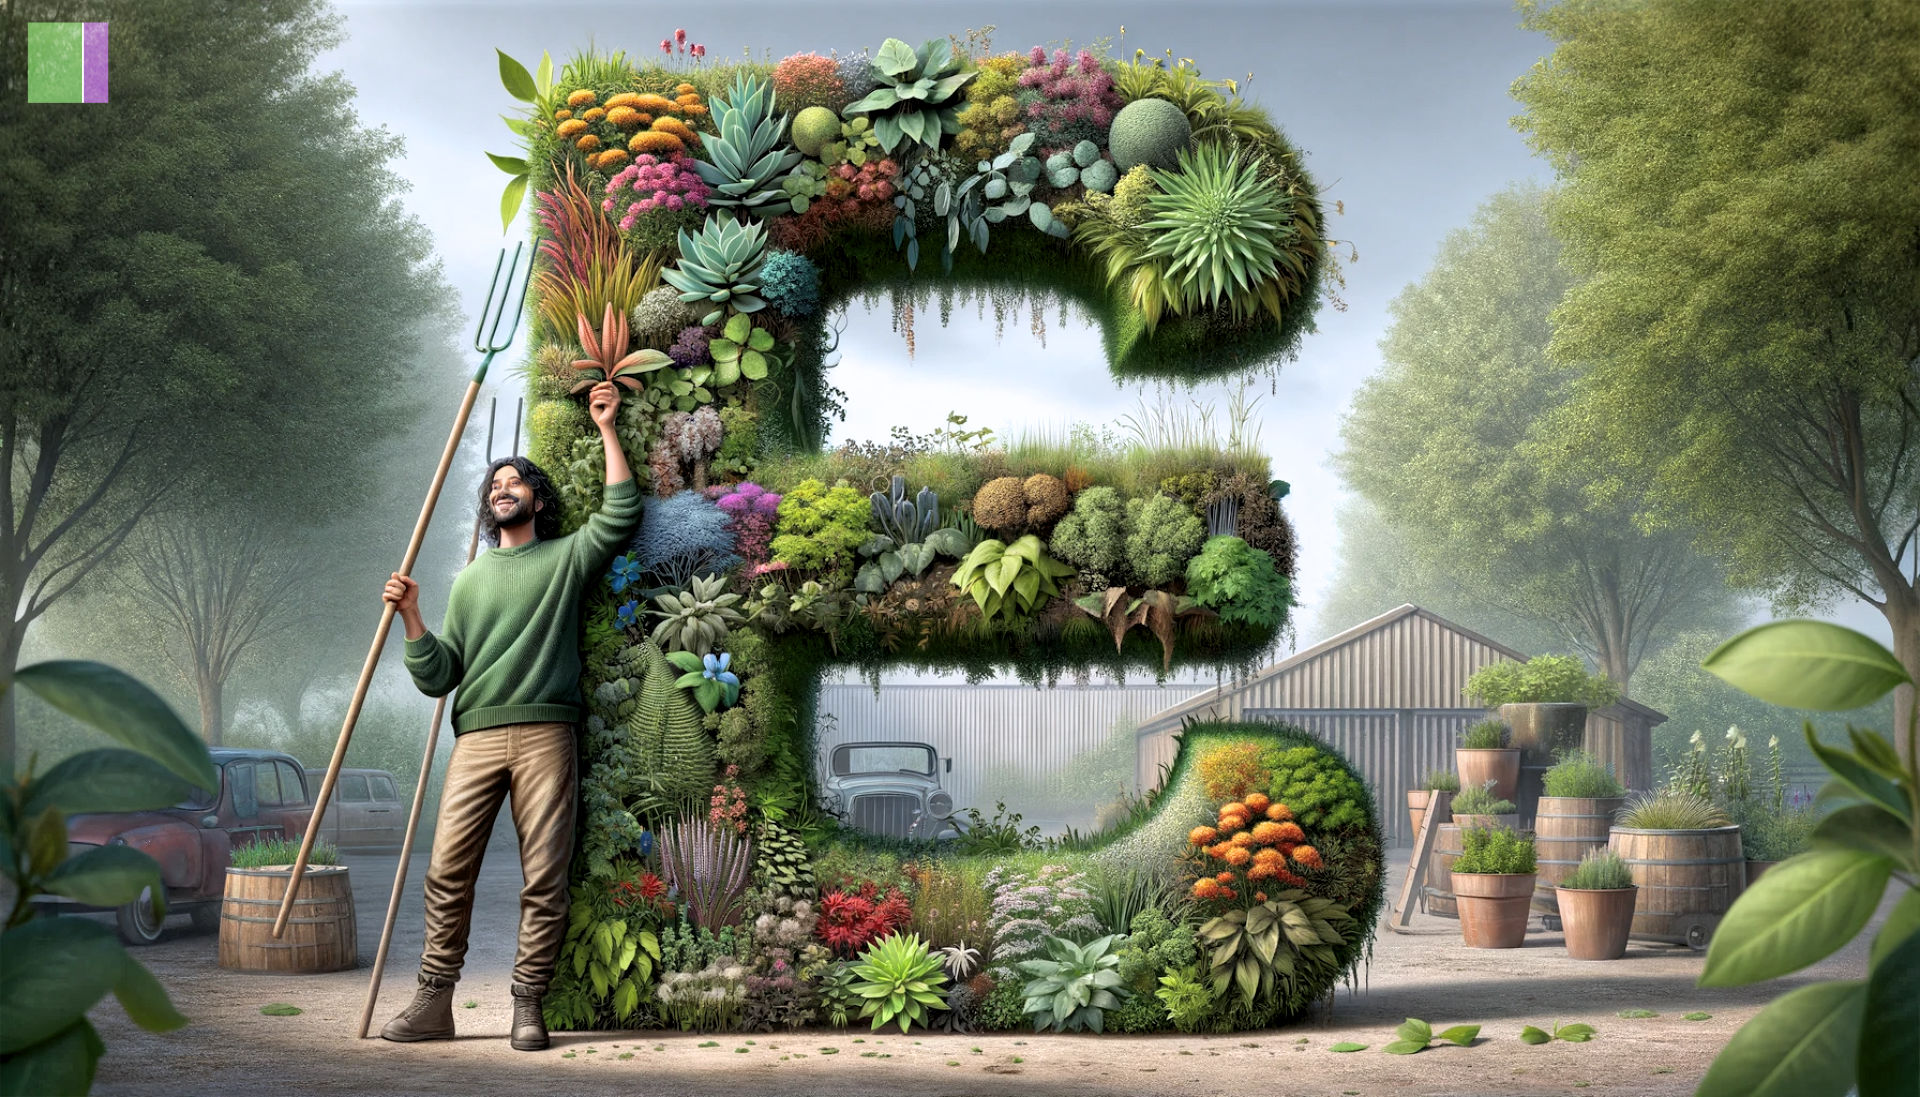 It shows a gardener, of South Asian descent and gender-neutral, holding a large, artistically composed letter 'E' made of various plants that start with 'E'. The realistic style of the image, combined with the detailed representation of the plants and the garden setting, aims to impress the readers with its visual quality and creativity. This image serves as a compelling visual introduction to your article, highlighting the diversity and beauty of plants starting with the letter 'E'. The signature green and purple square Fresh Kit Icon serves as a watermark in the top left corner.